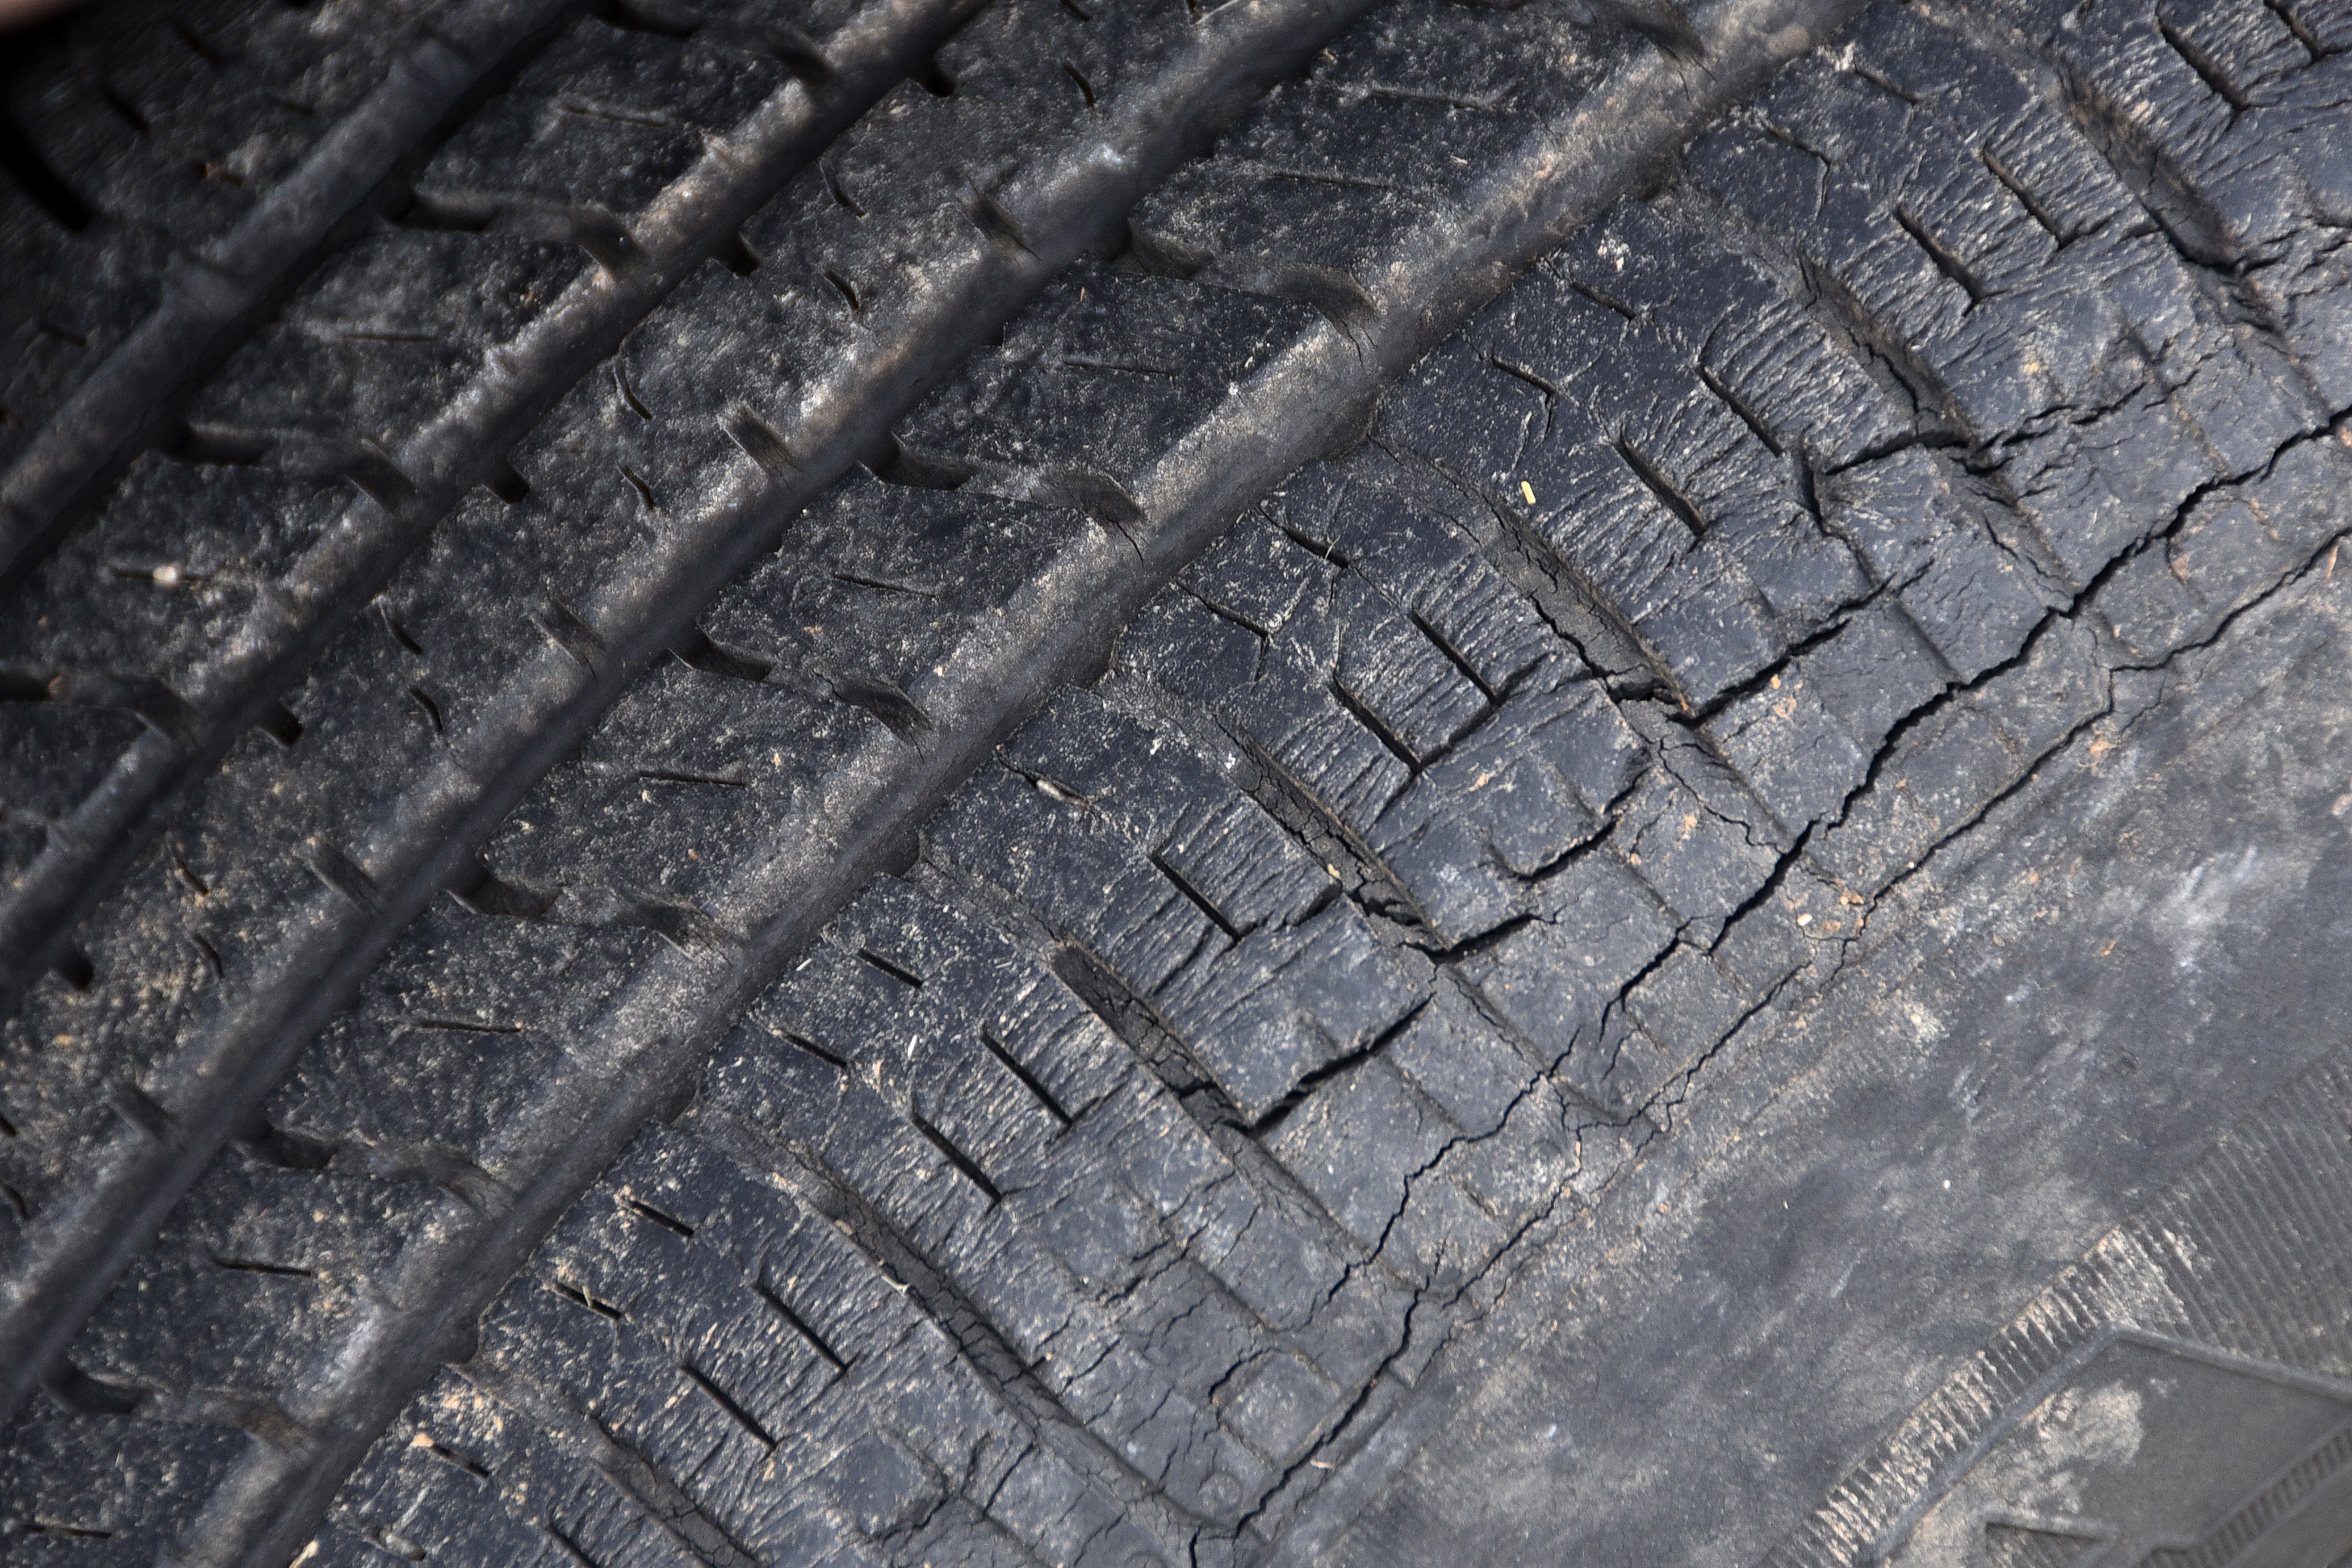 a tire with dry rot